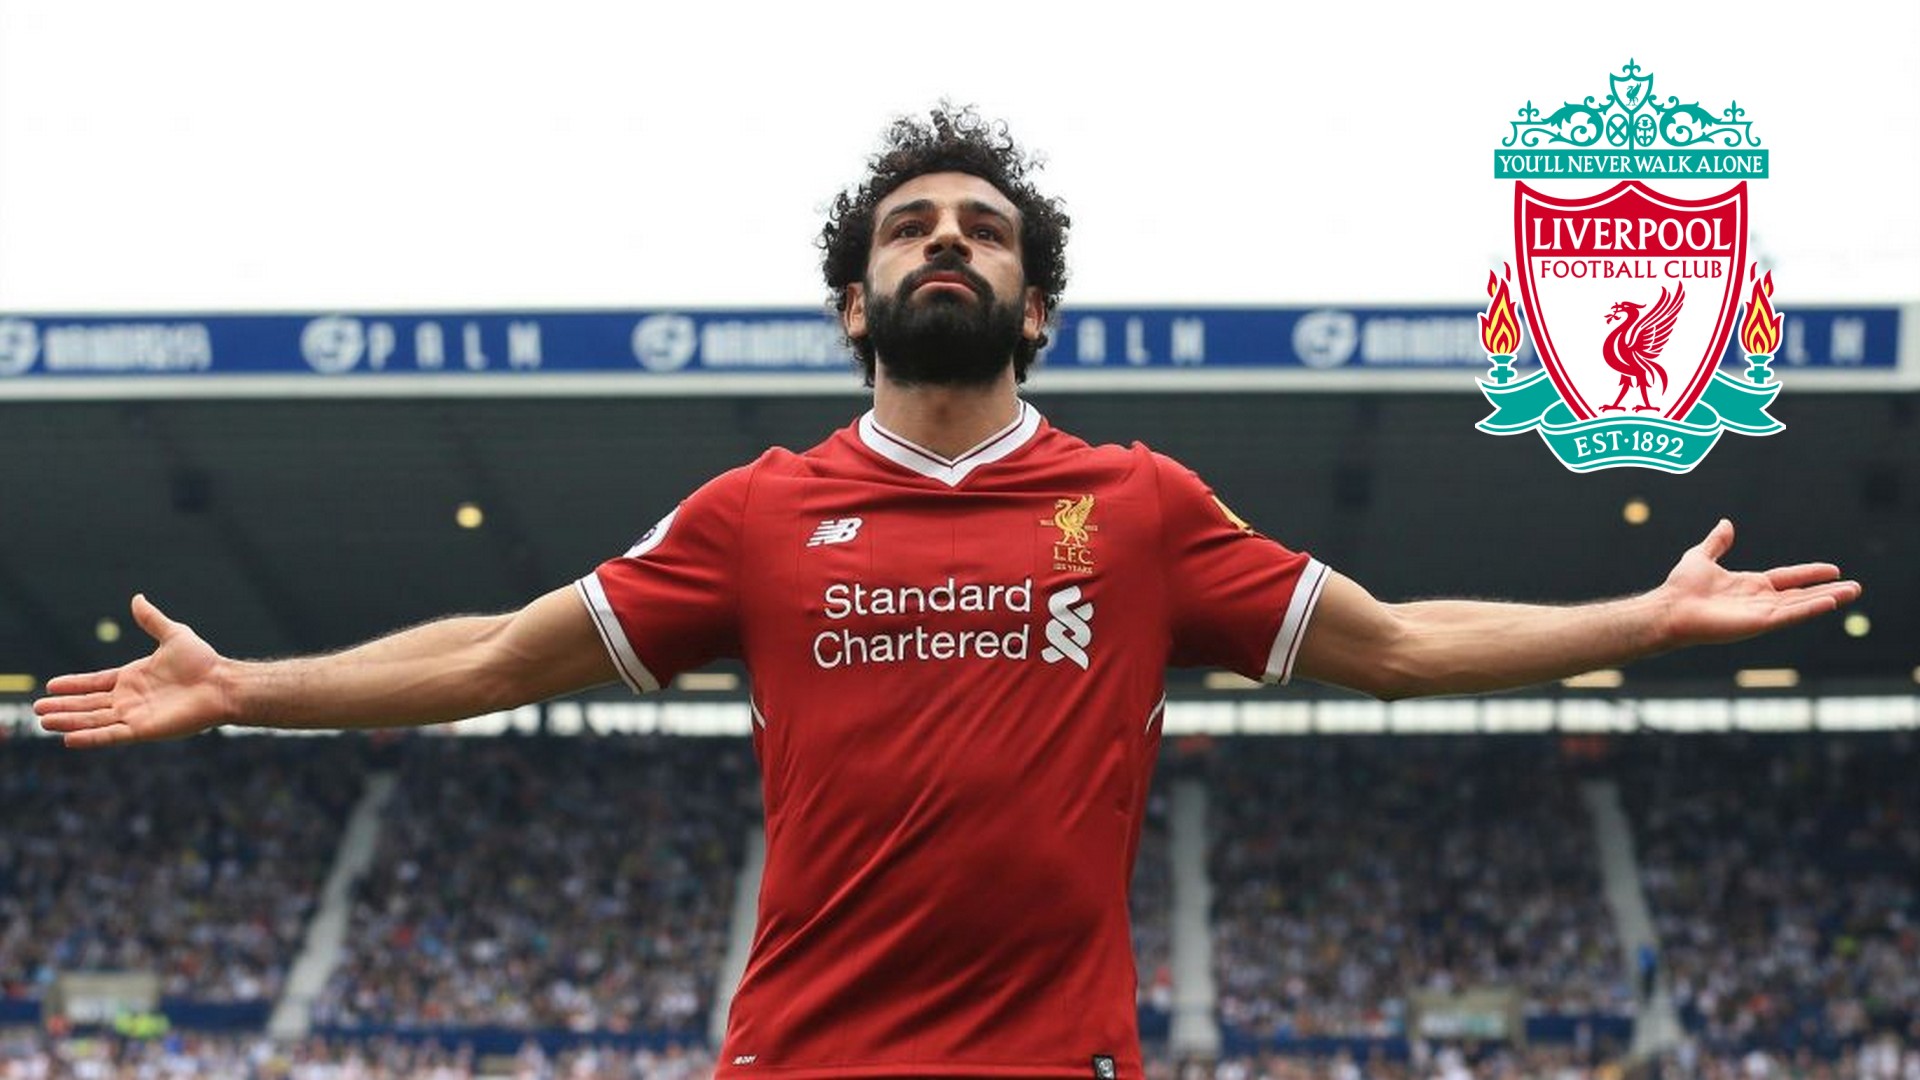 Mohamed Salah Desktop Wallpaper with resolution 1920X1080 pixel. You can use this wallpaper as background for your desktop Computer Screensavers, Android or iPhone smartphones